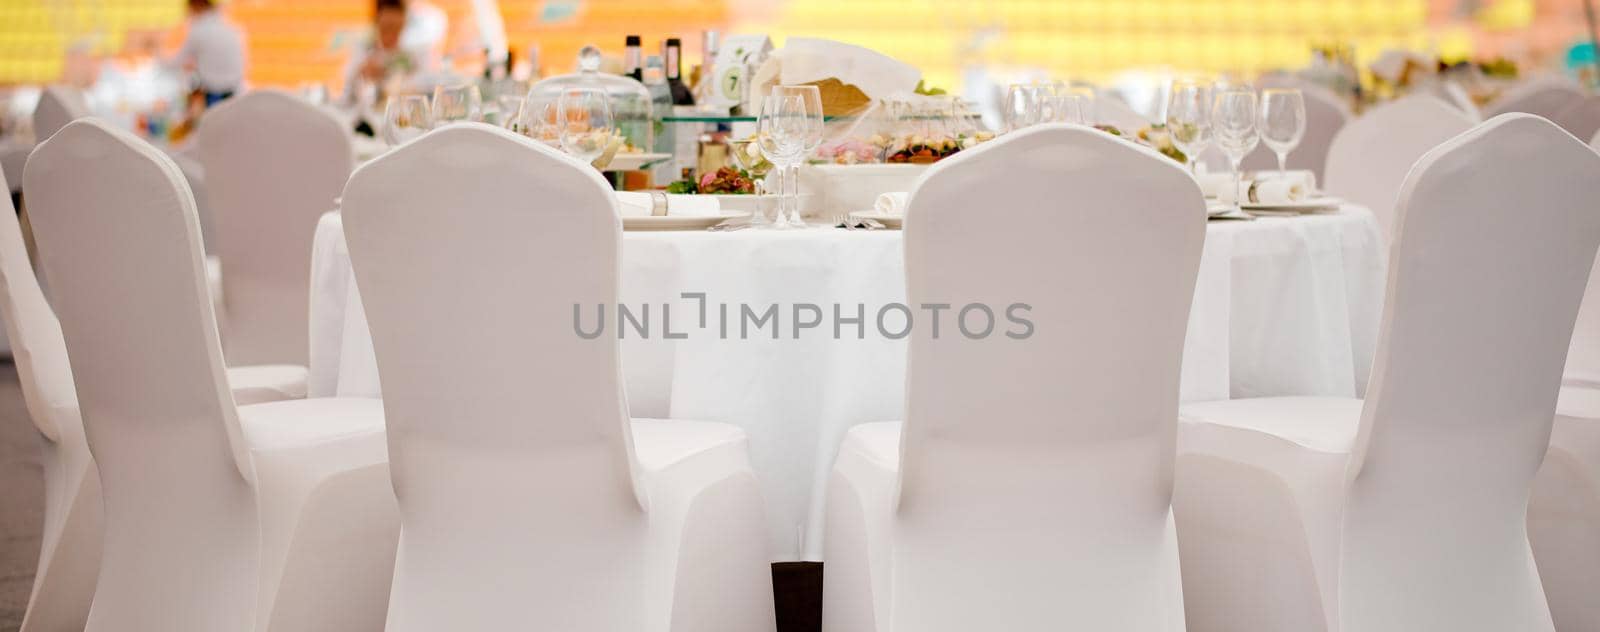 Served a full meal table with chairs in white covers ready to be received . High quality photo